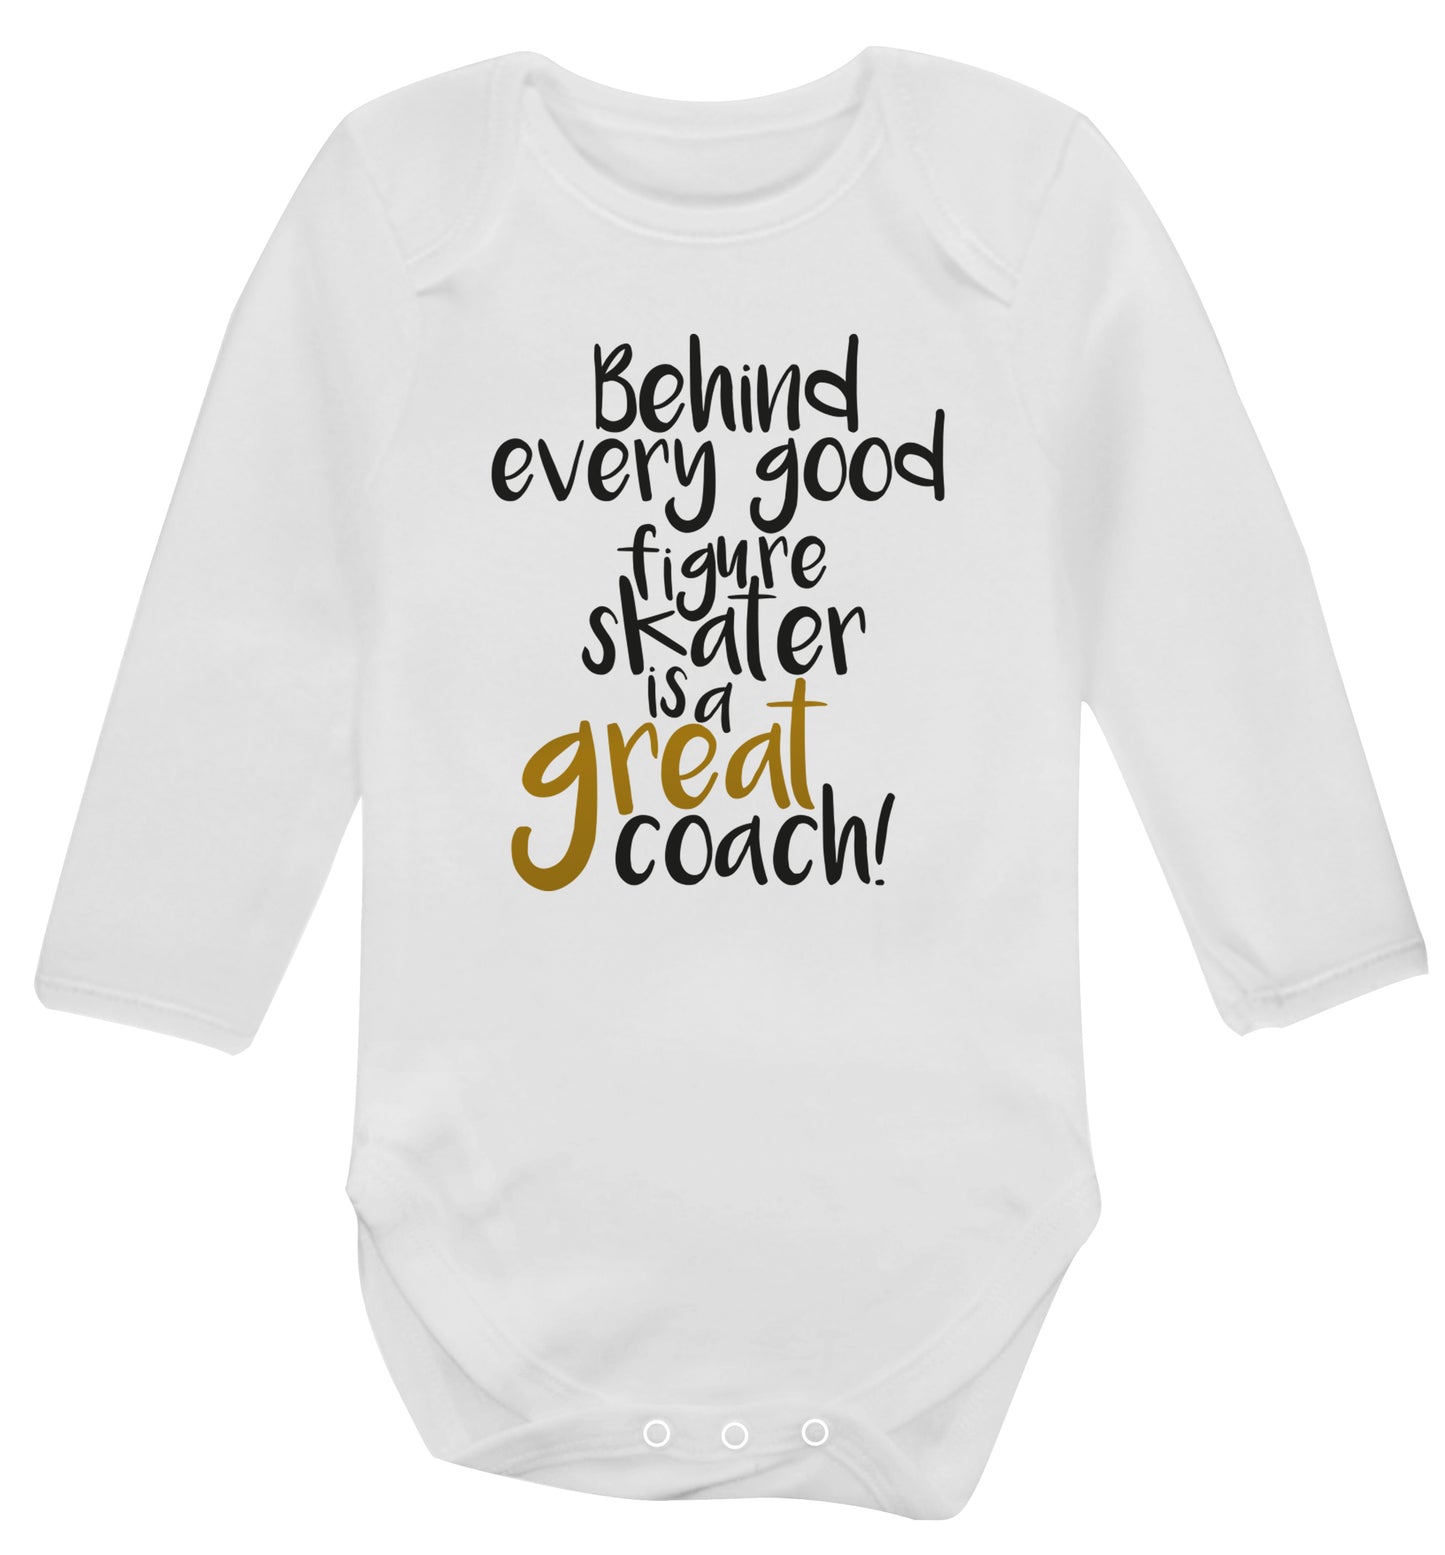 Behind every good figure skater is a great coach Baby Vest long sleeved white 6-12 months